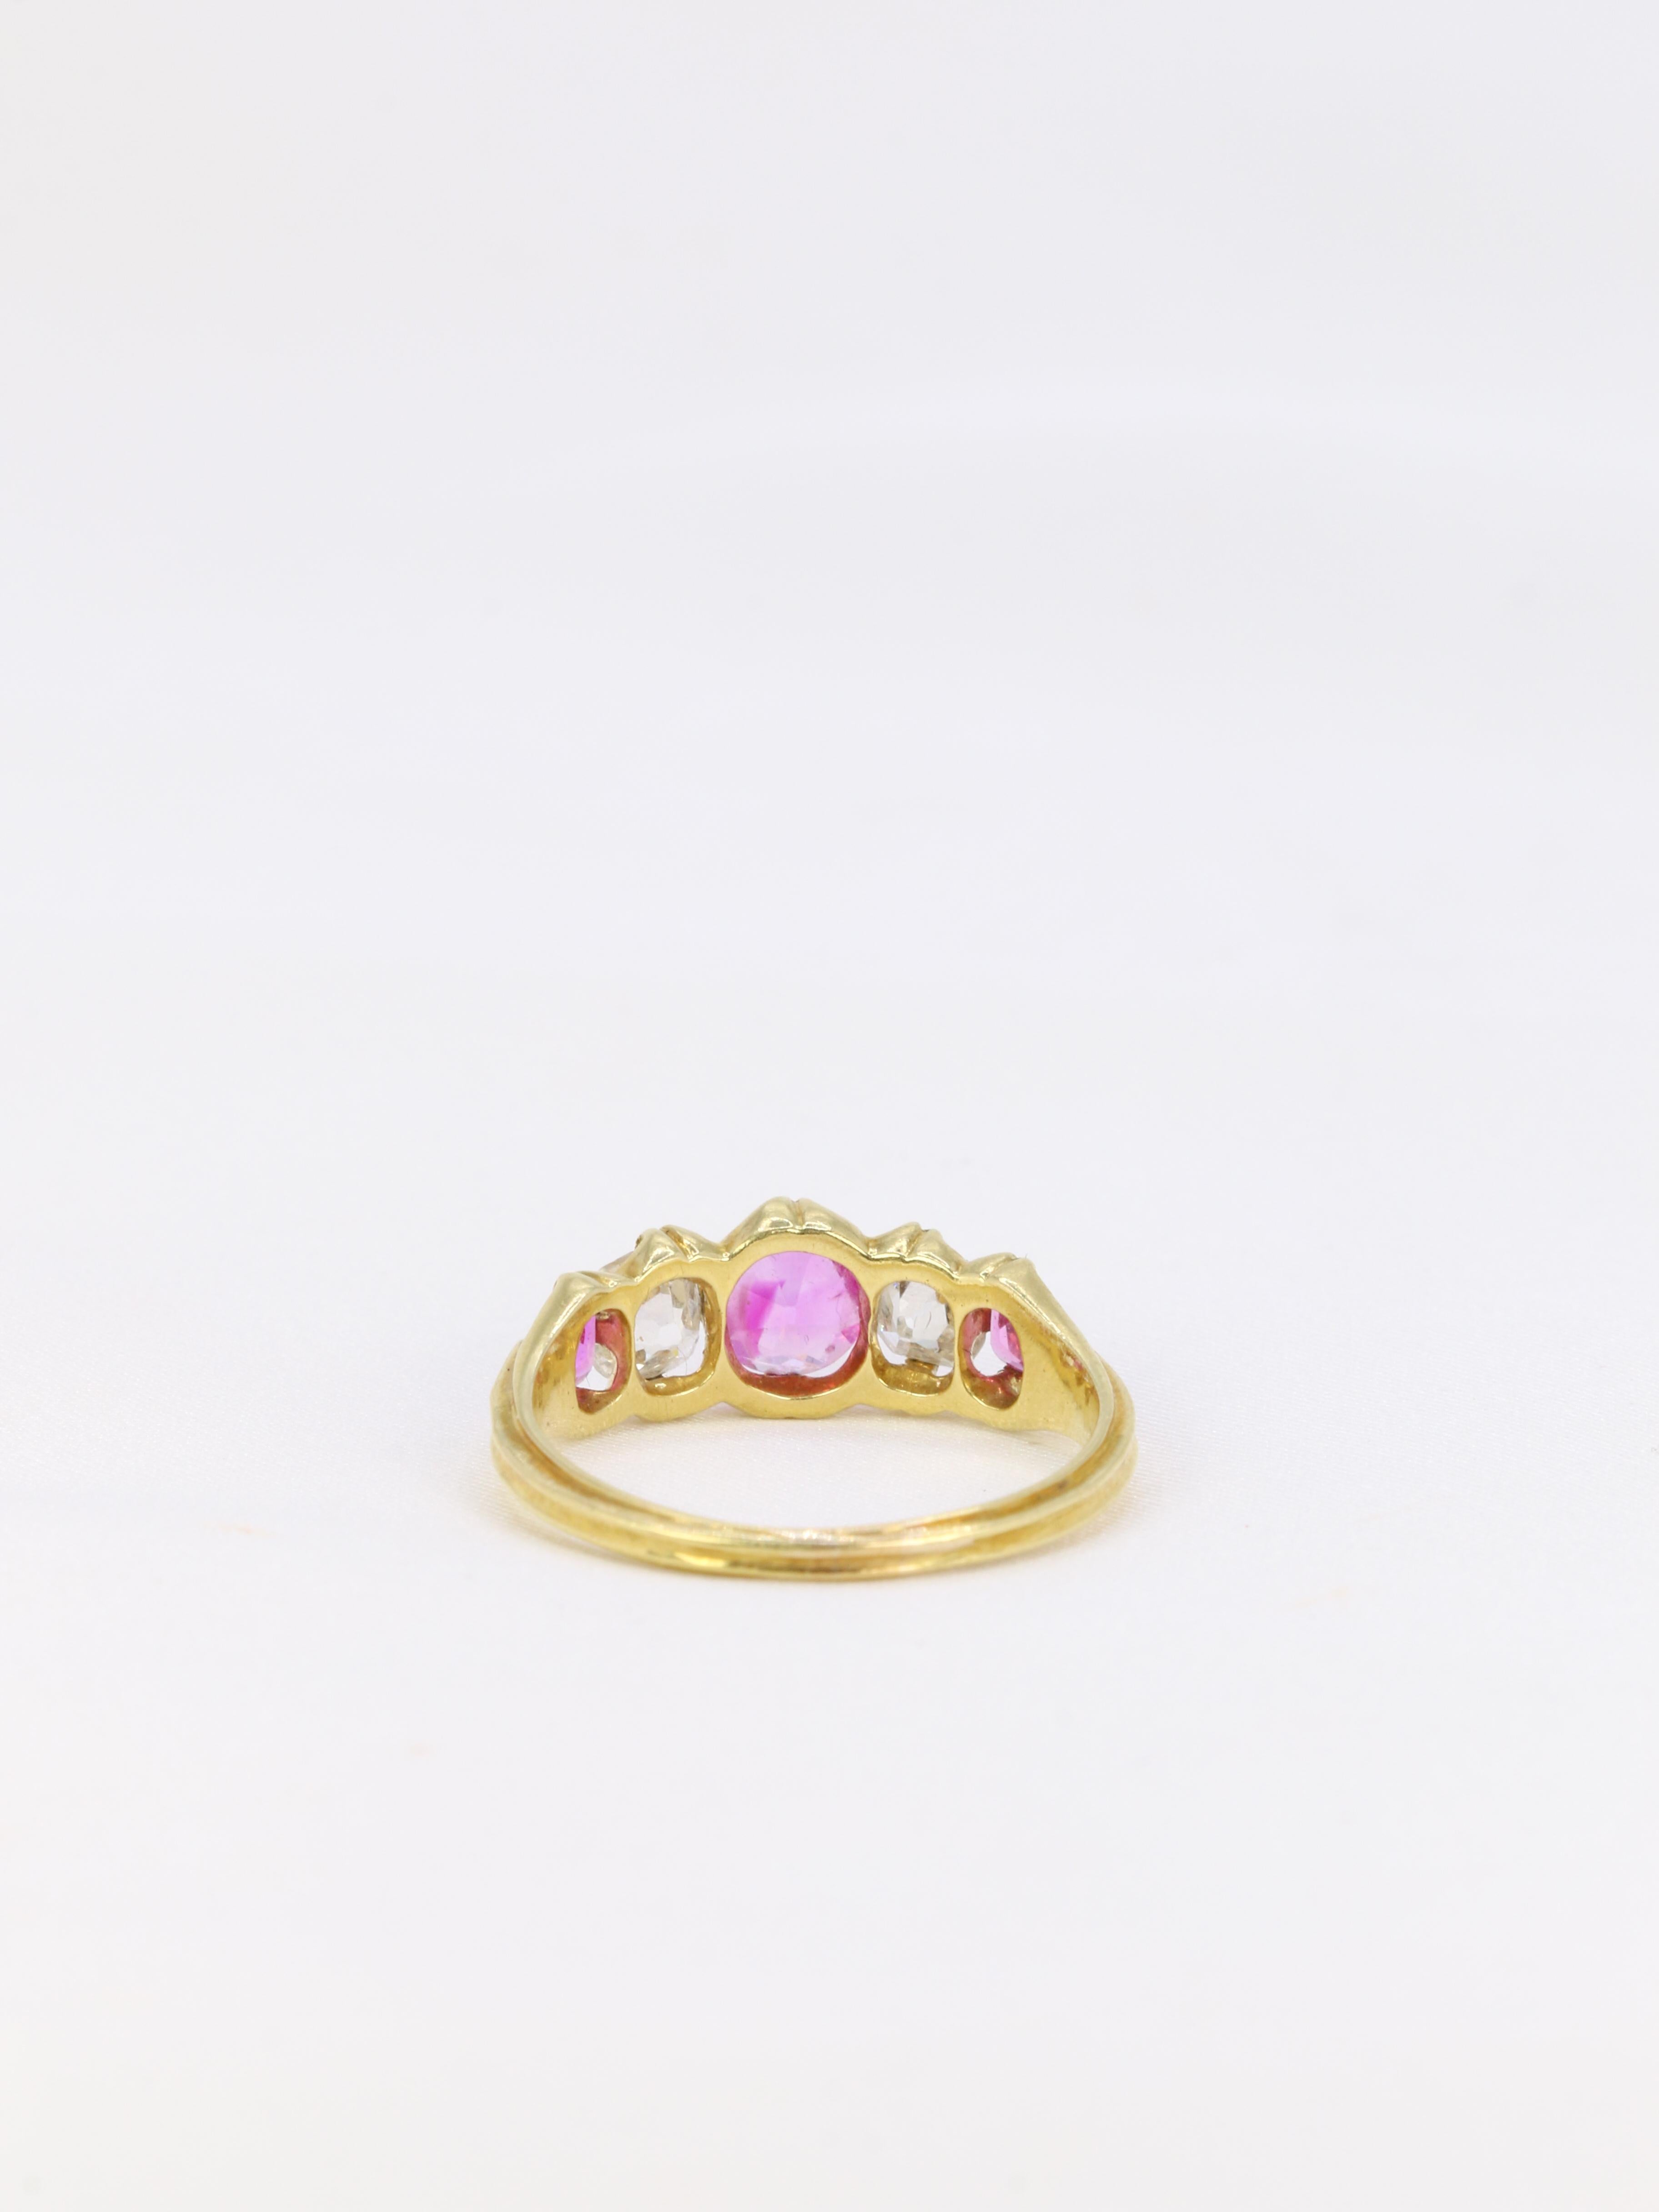 Old Mine Cut Yellow gold, pink sapphires and old mine cut diamonds garter ring For Sale